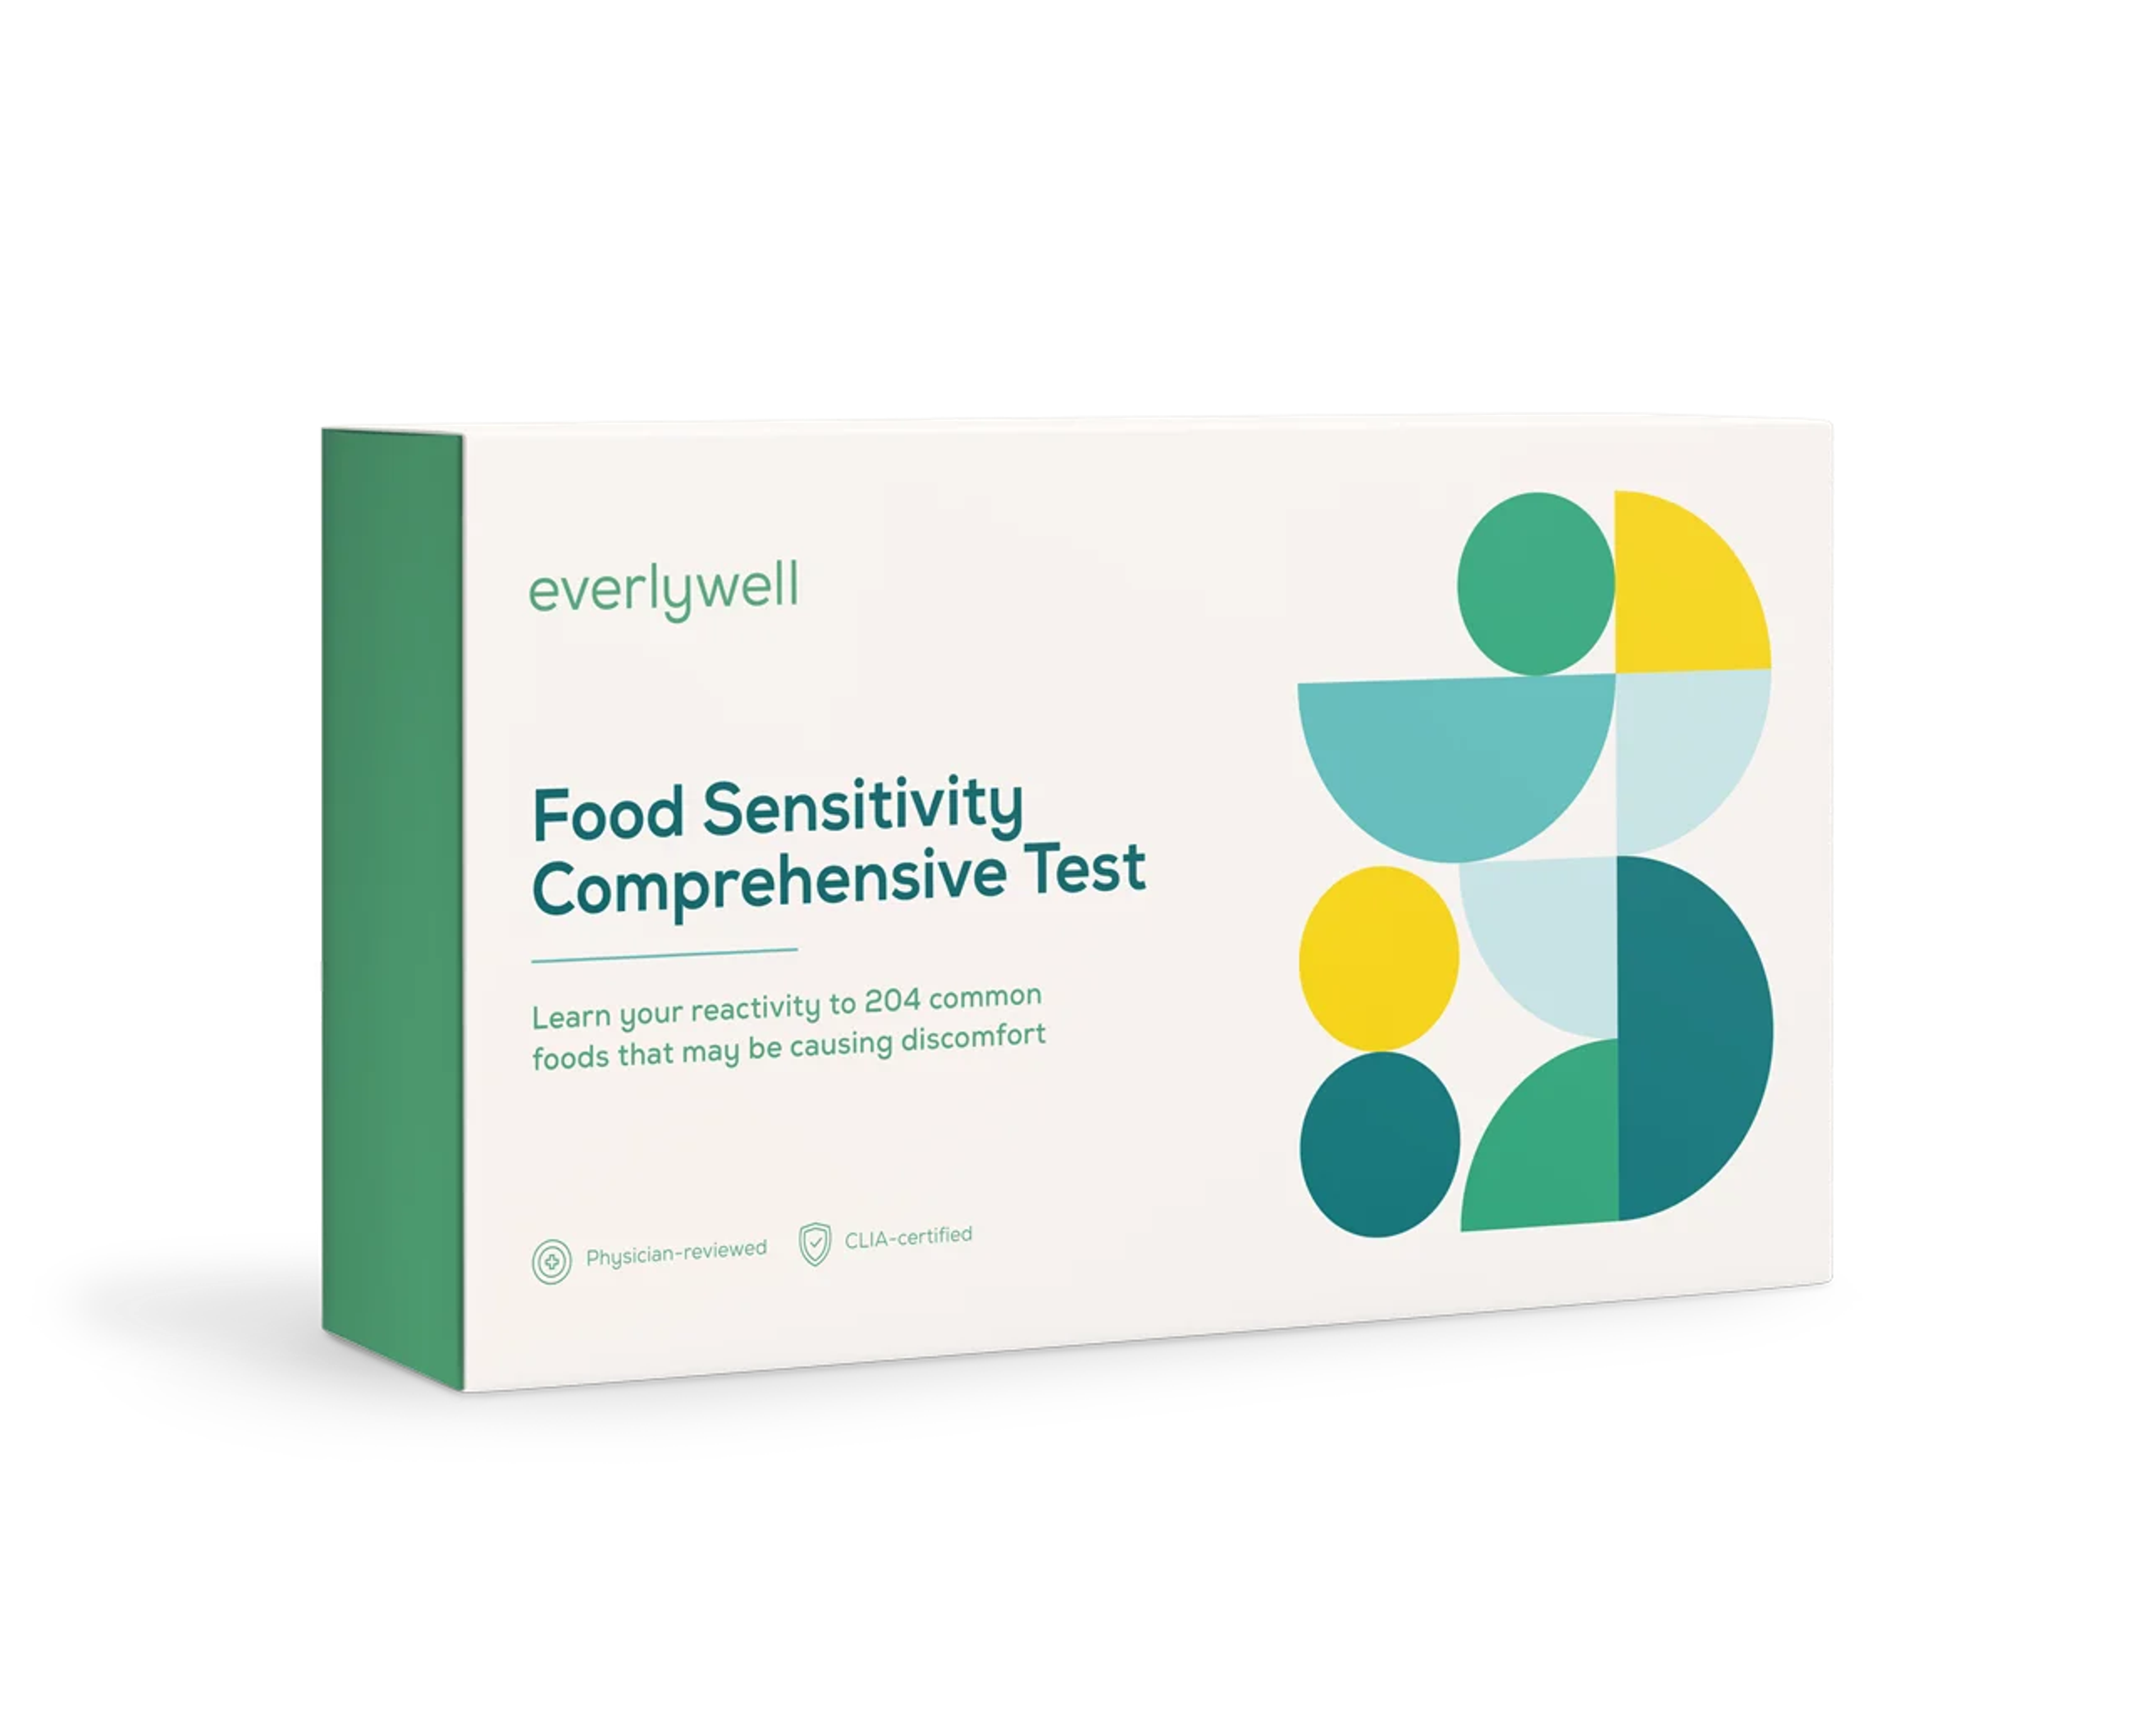 At Home Food Sensitivity Comprehensive Test - Easy to Use and Understand - Everlywell